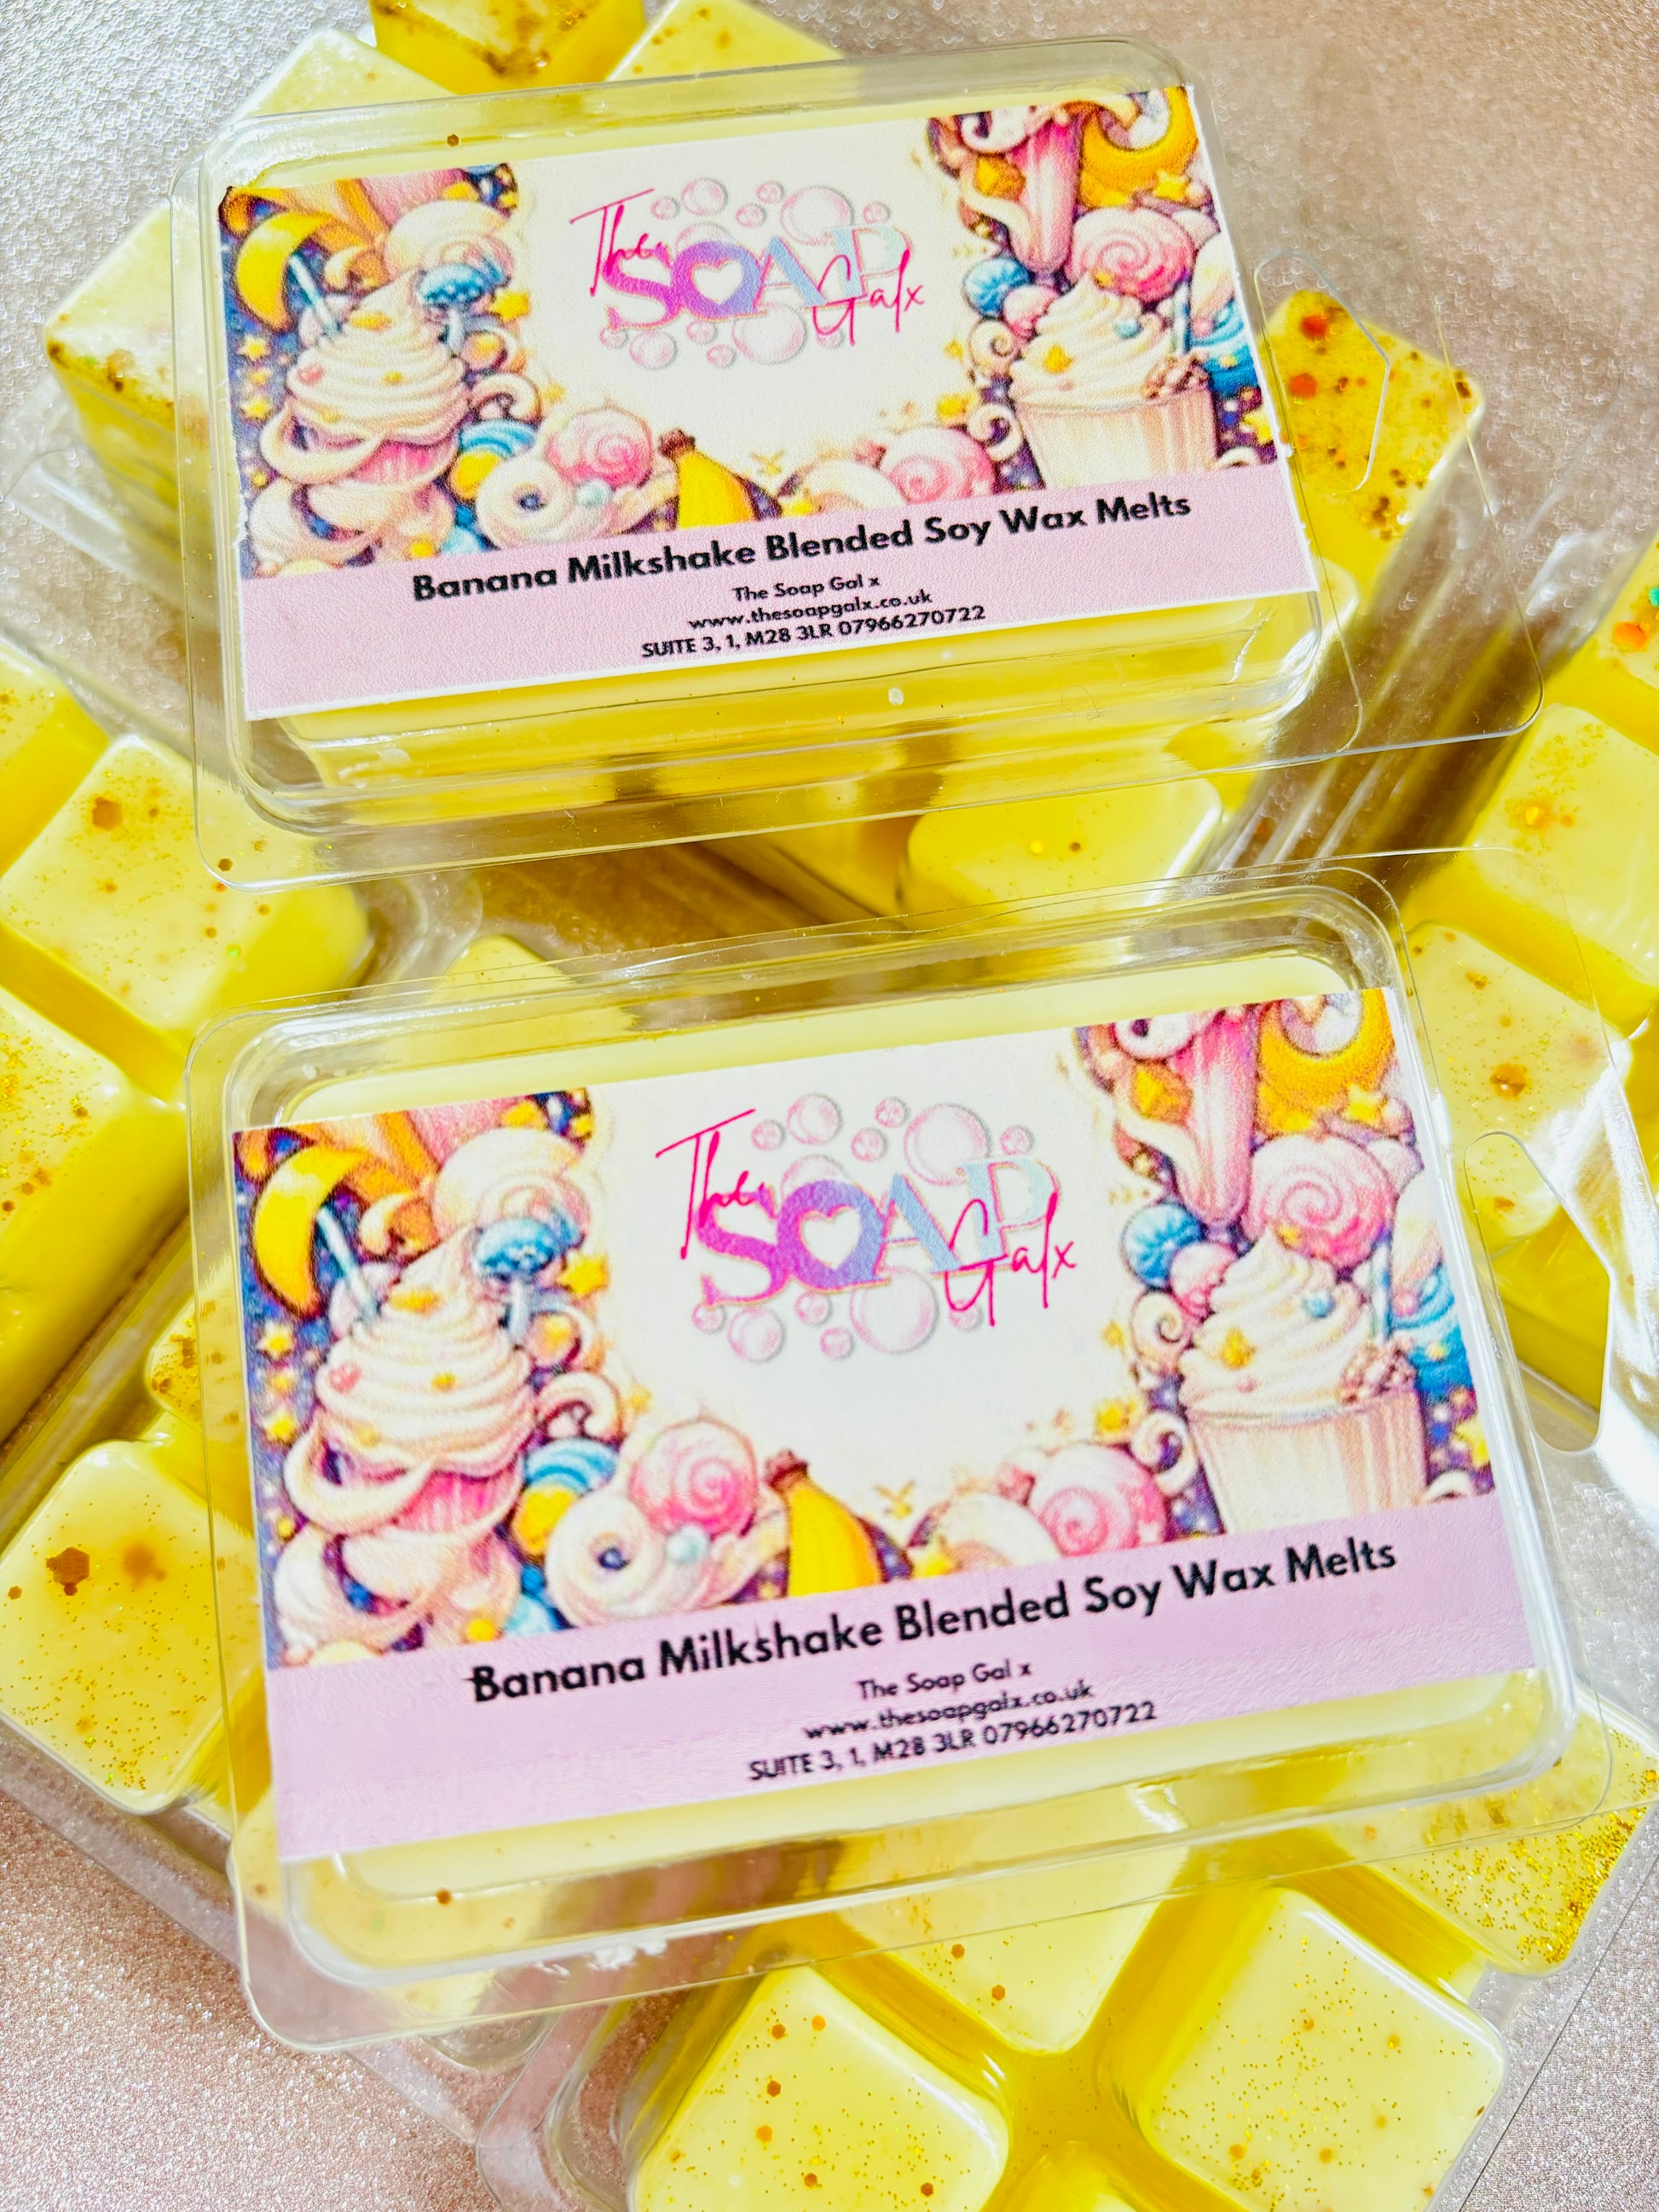 Packaged Banana Milkshake wax melts scented soy candle with colorful labels by The Soap Gal x.